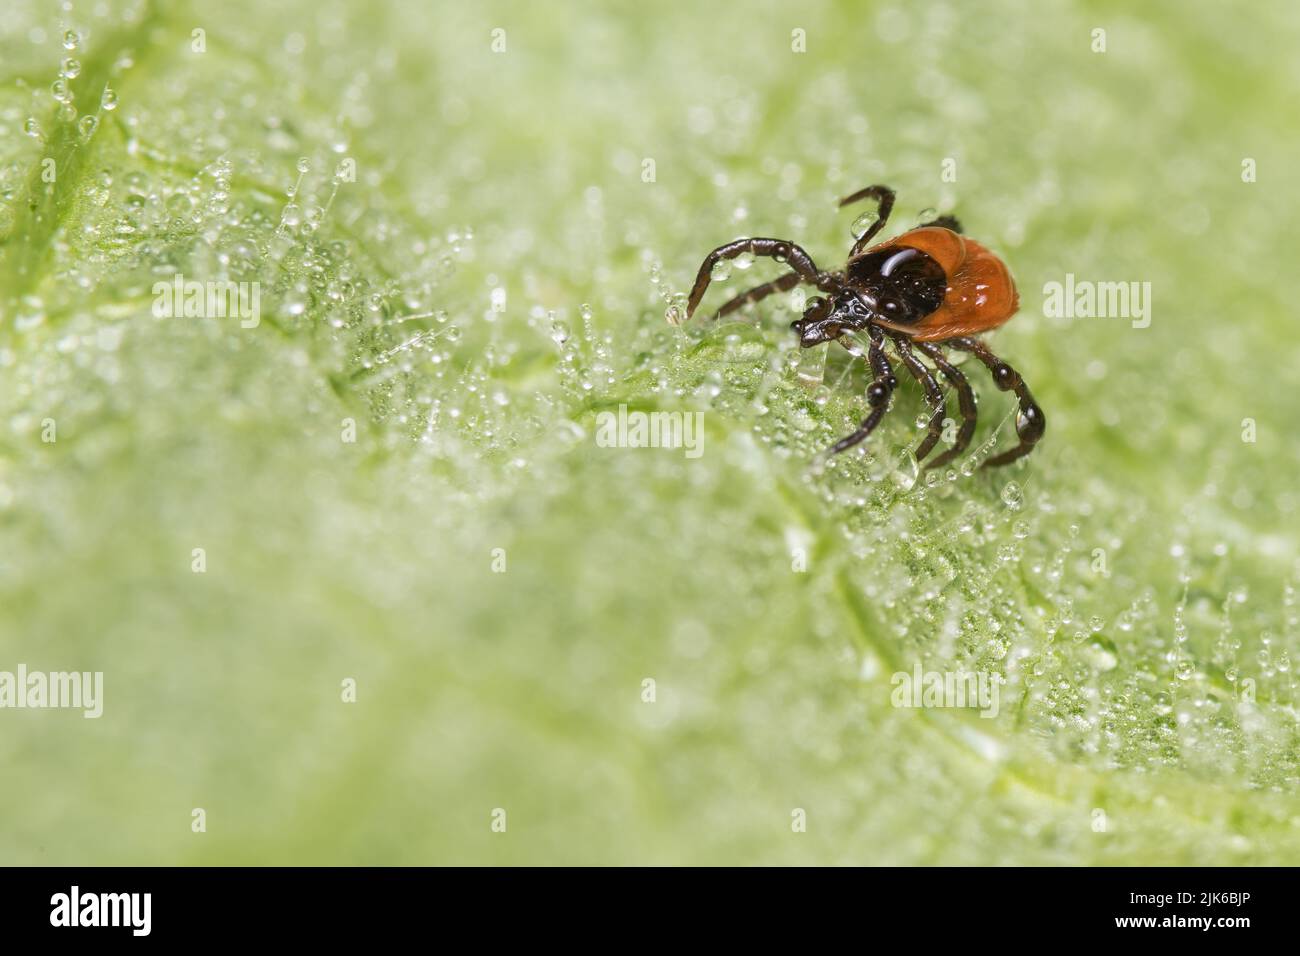 Wet female deer tick crawling in water drops on hairy green leaf. Ixodes ricinus or scapularis. Closeup a dangerous parasite on nature blur background. Stock Photo